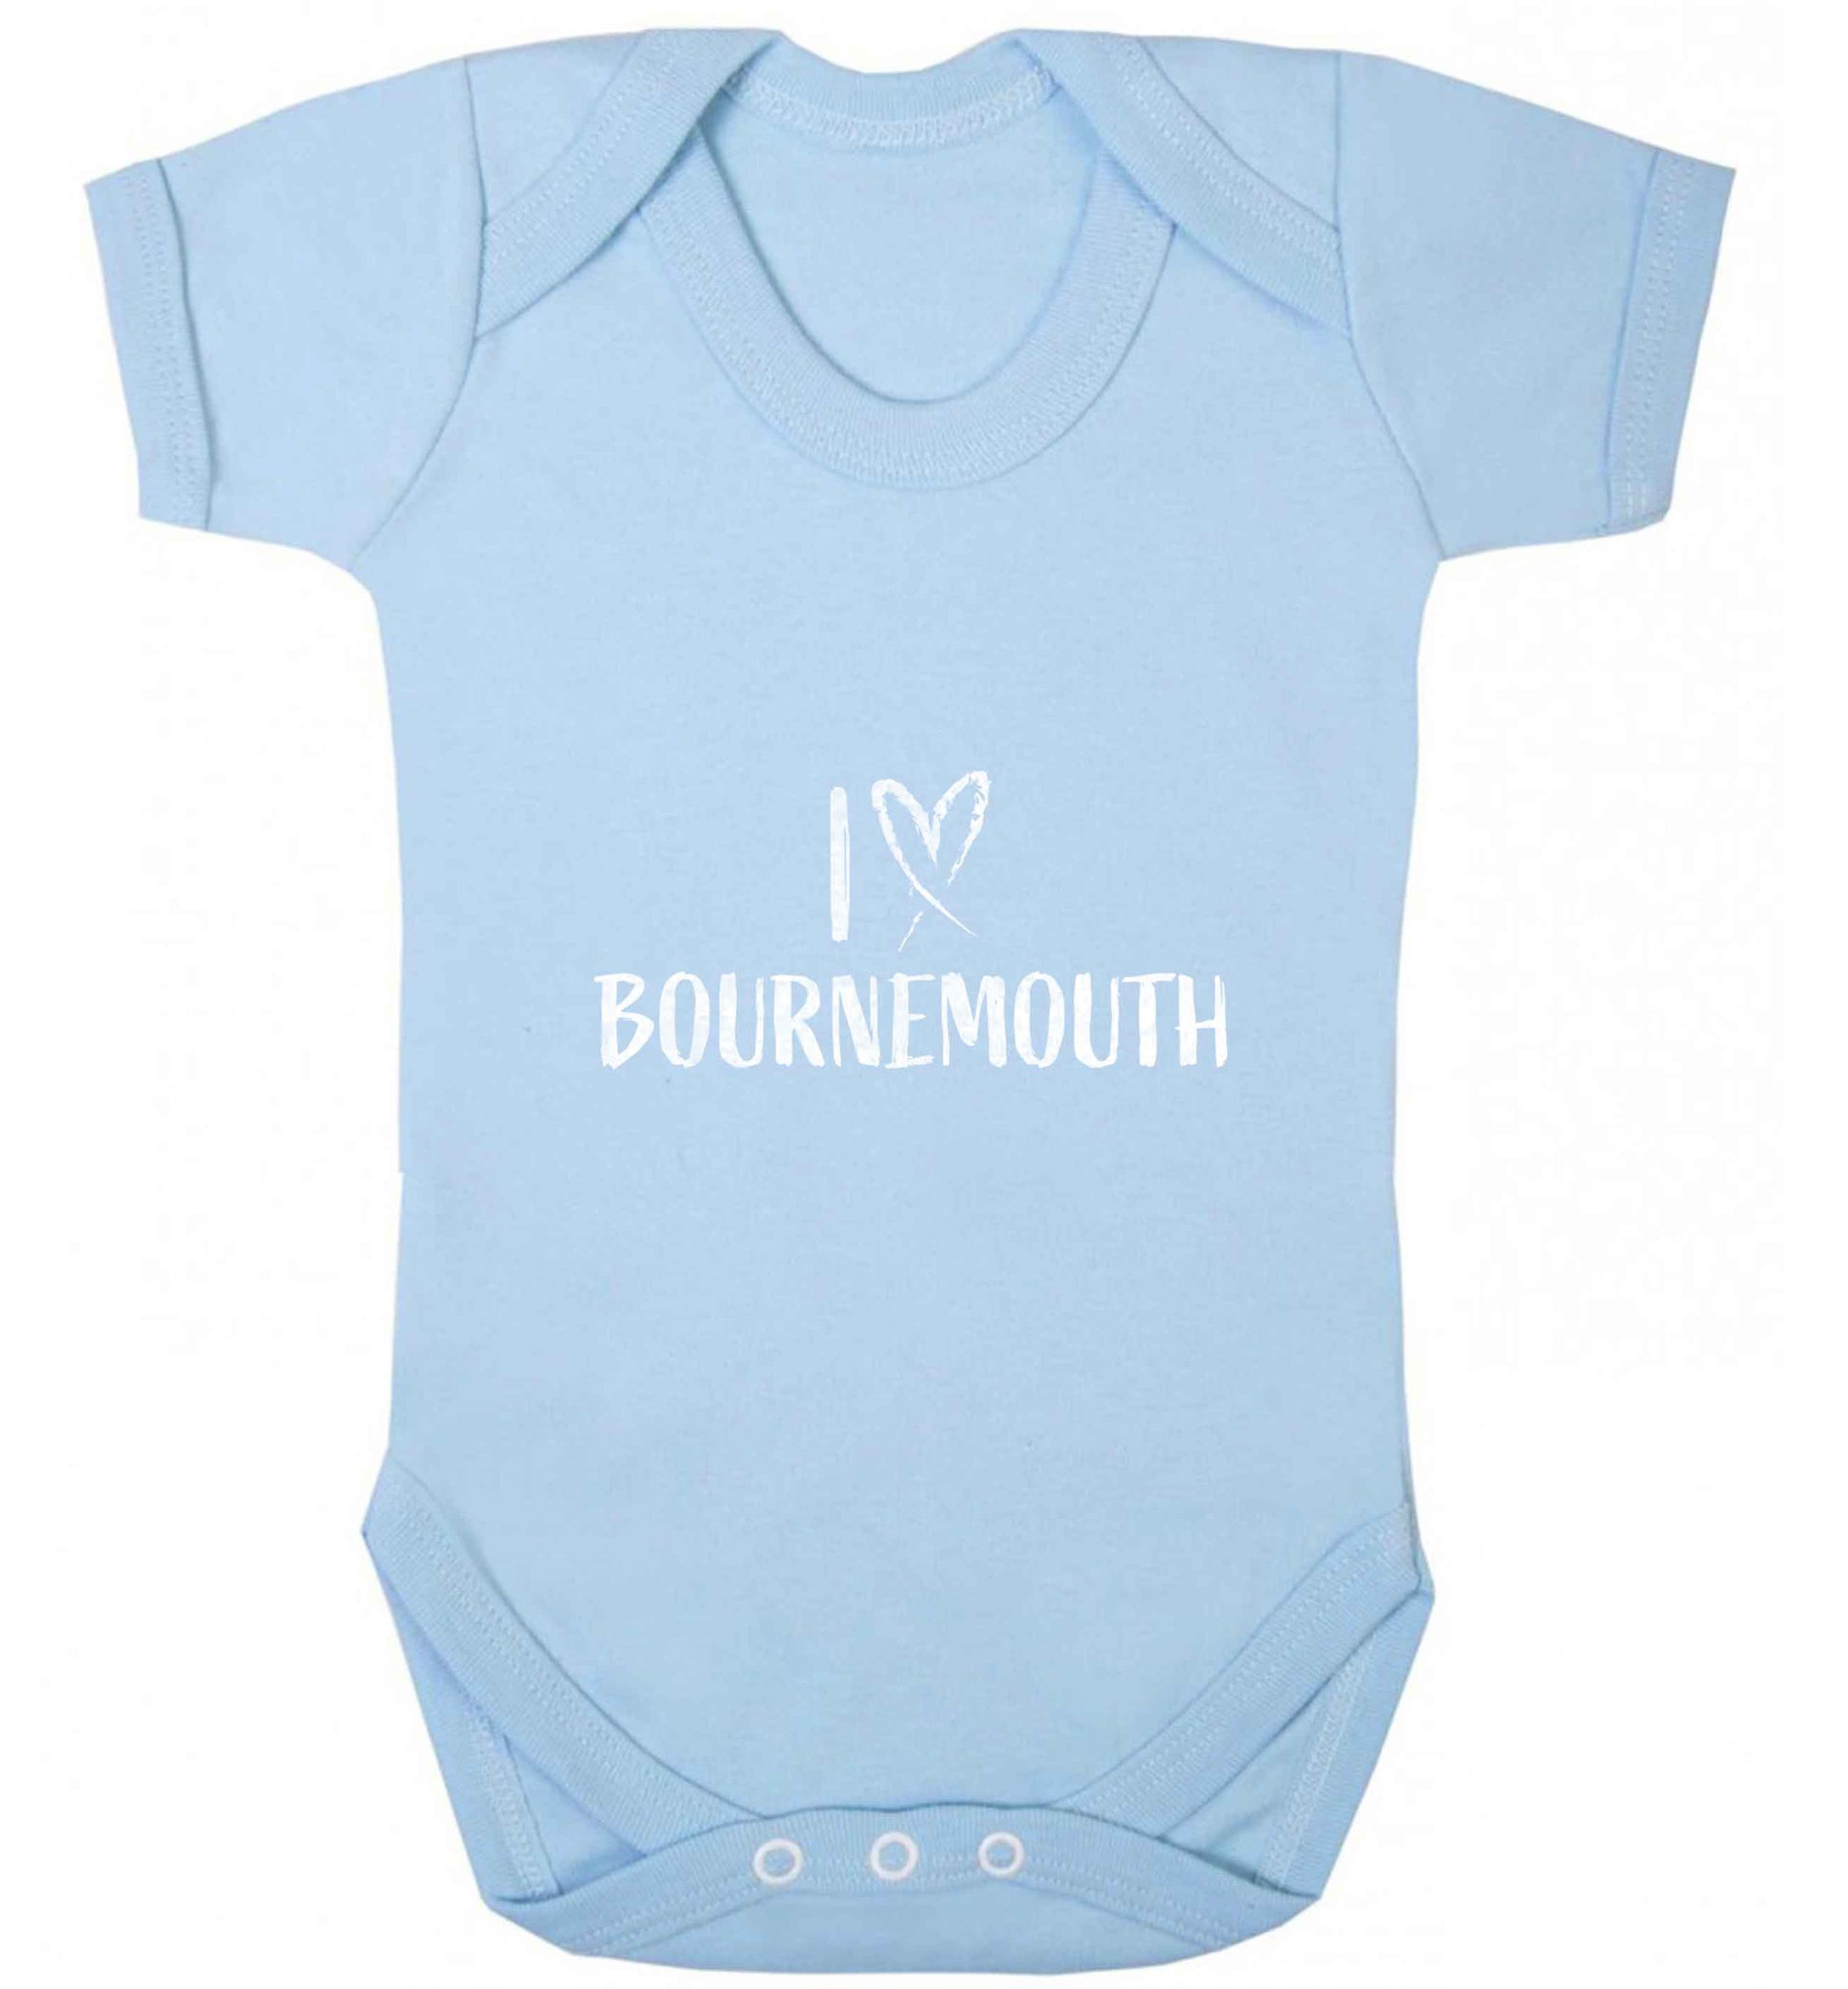 I love Bournemouth baby vest pale blue 18-24 months